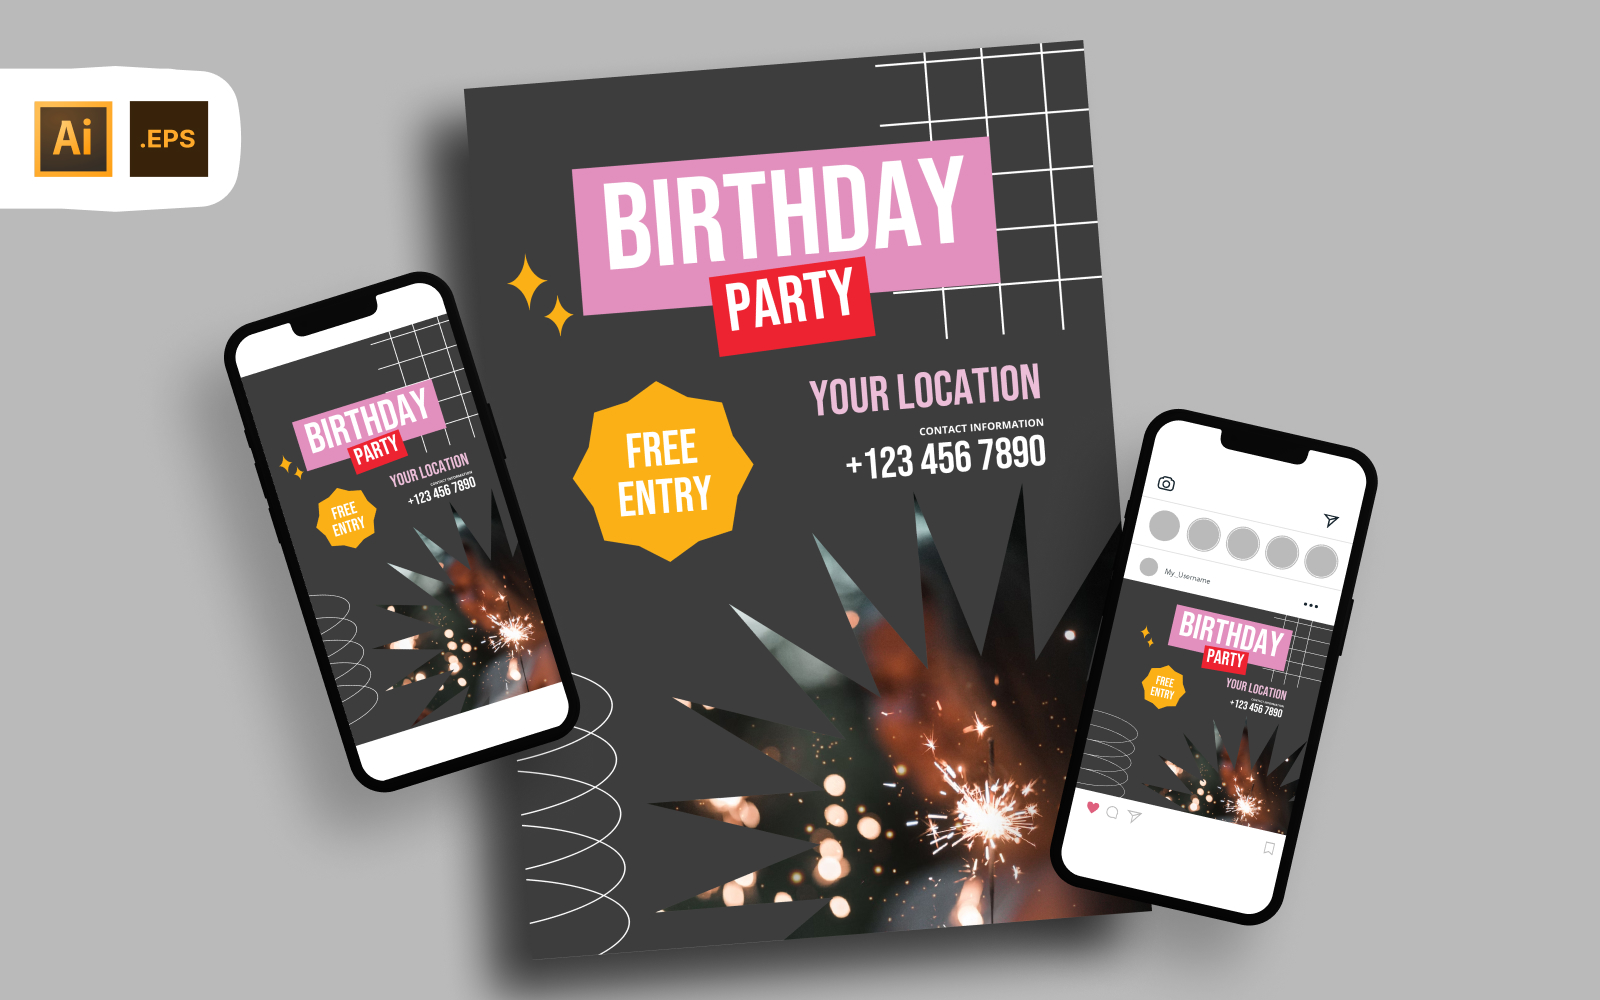 Template #367474 Birthday Party Webdesign Template - Logo template Preview